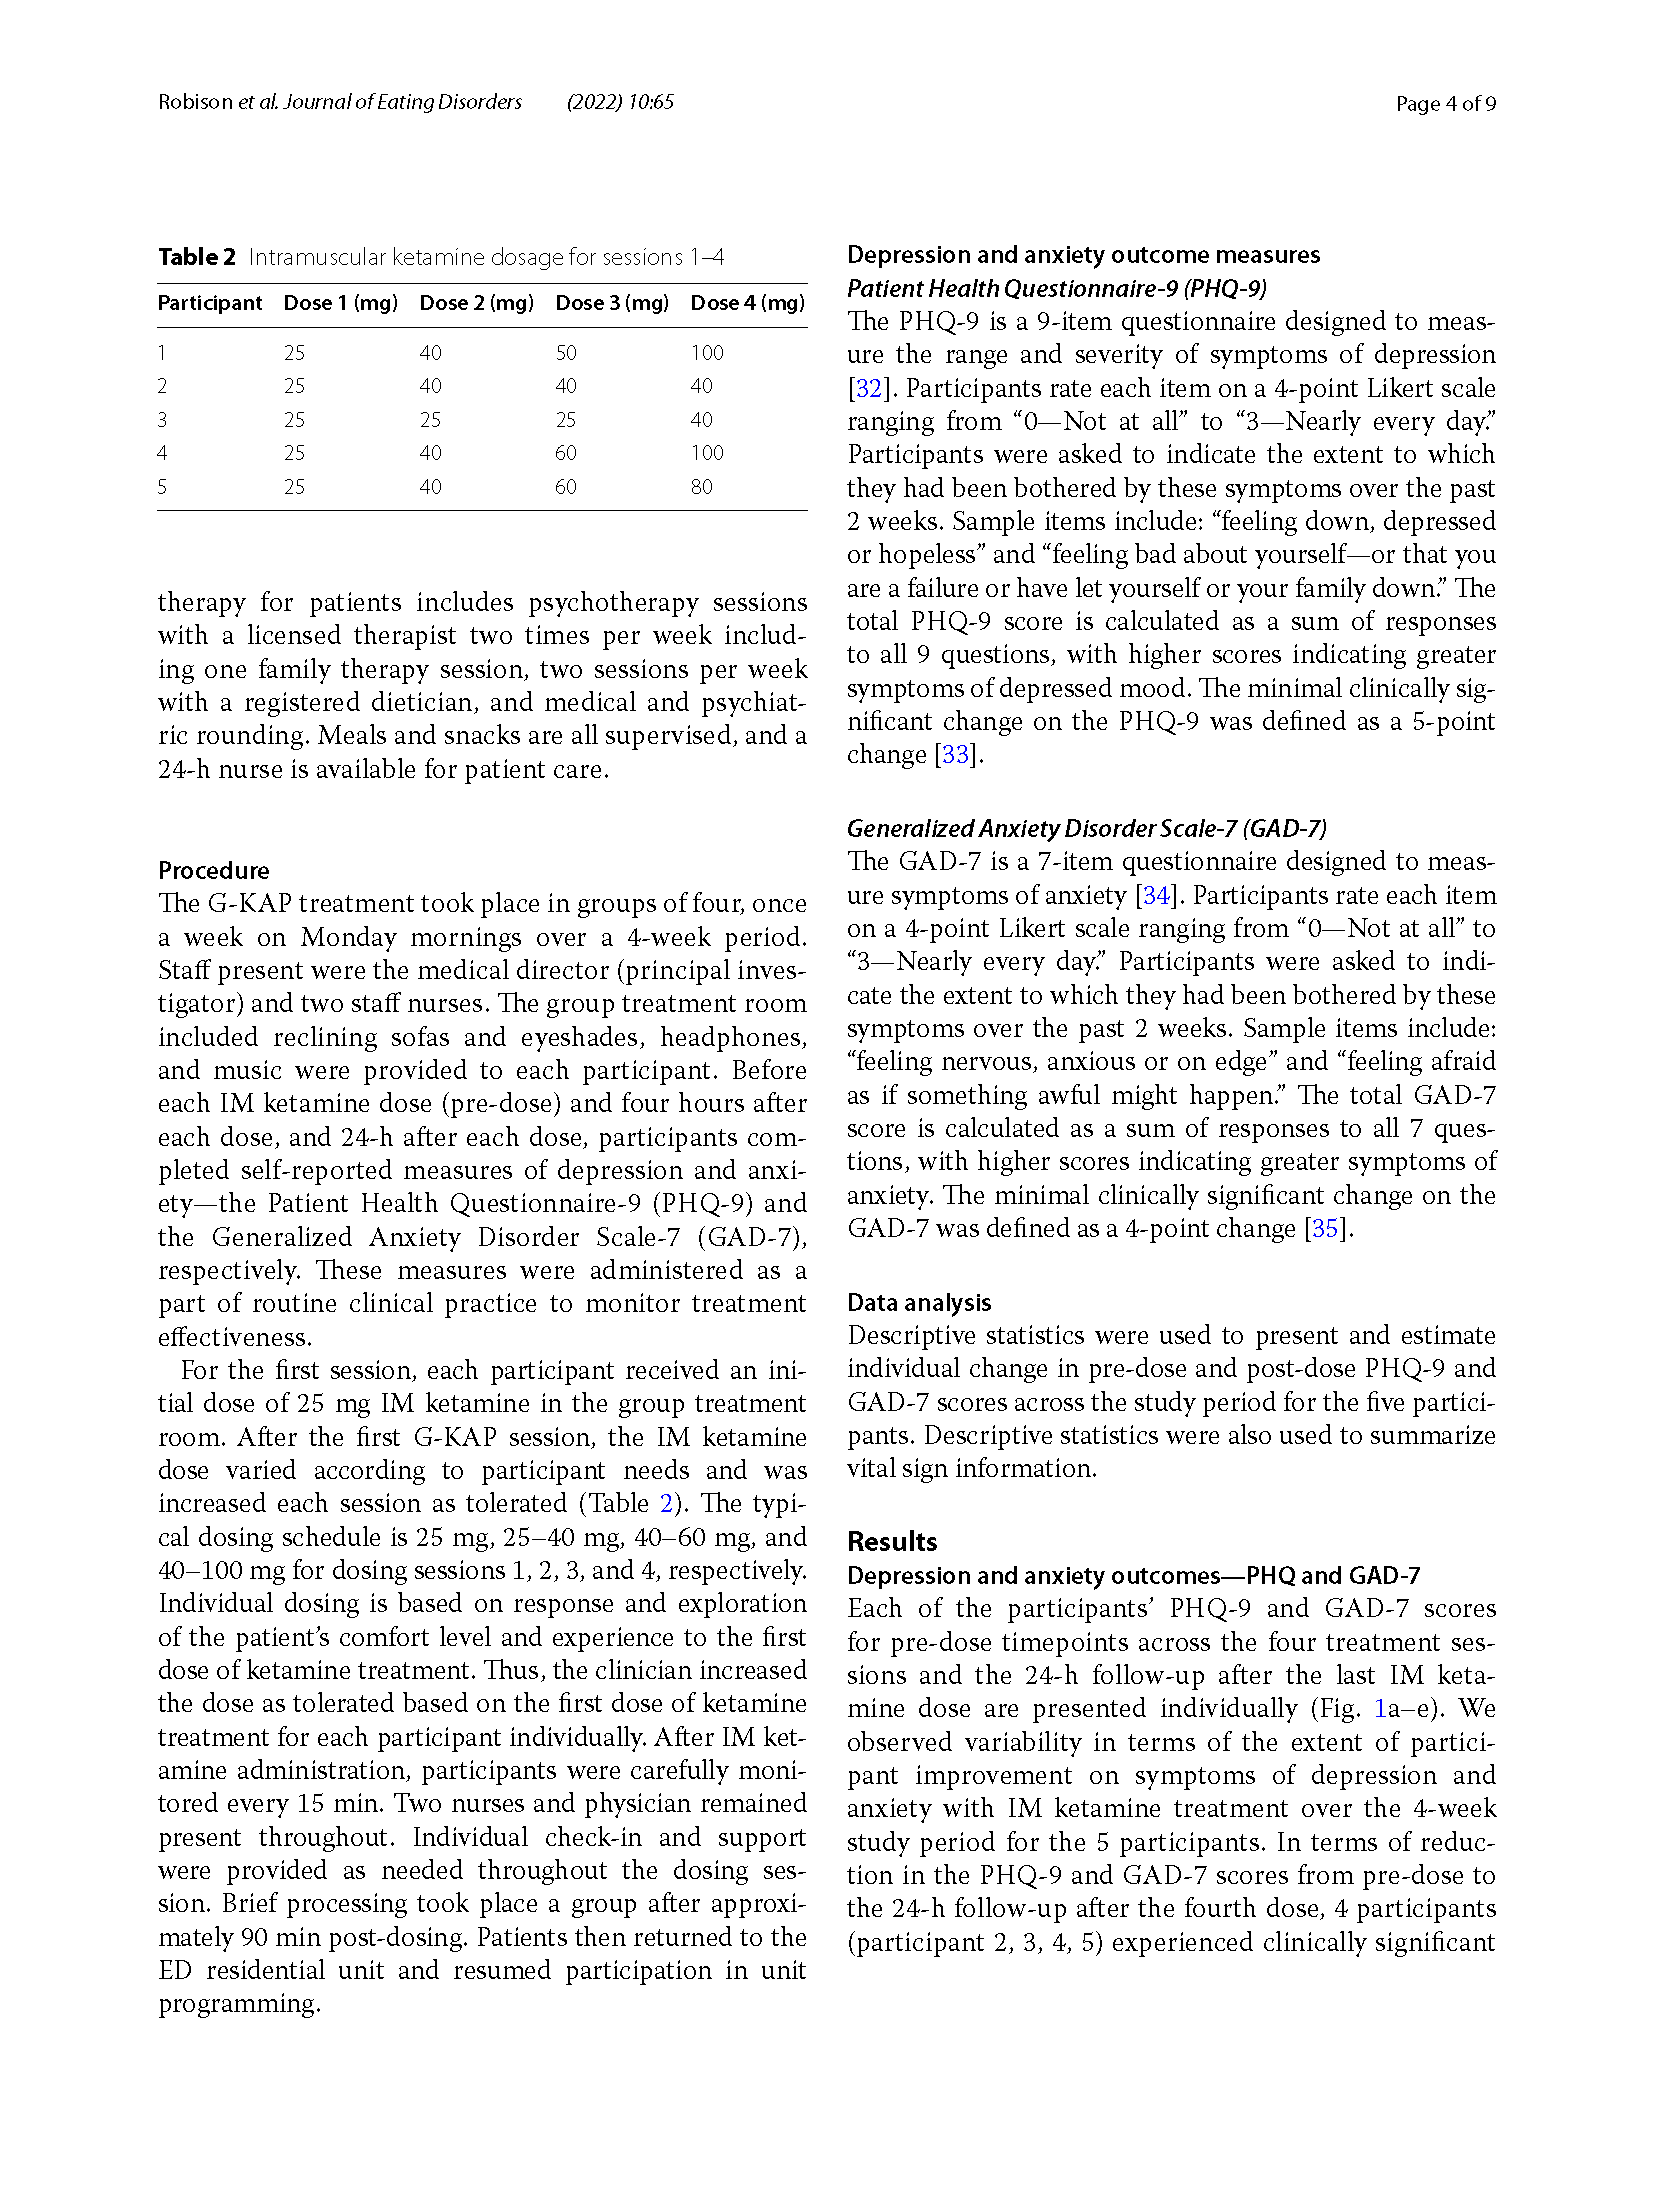 Group-based ketamine-assisted psychotherapy for patients in residential treatment for eating disorders with comorbid depression and anxiety disorders_Page_4.png